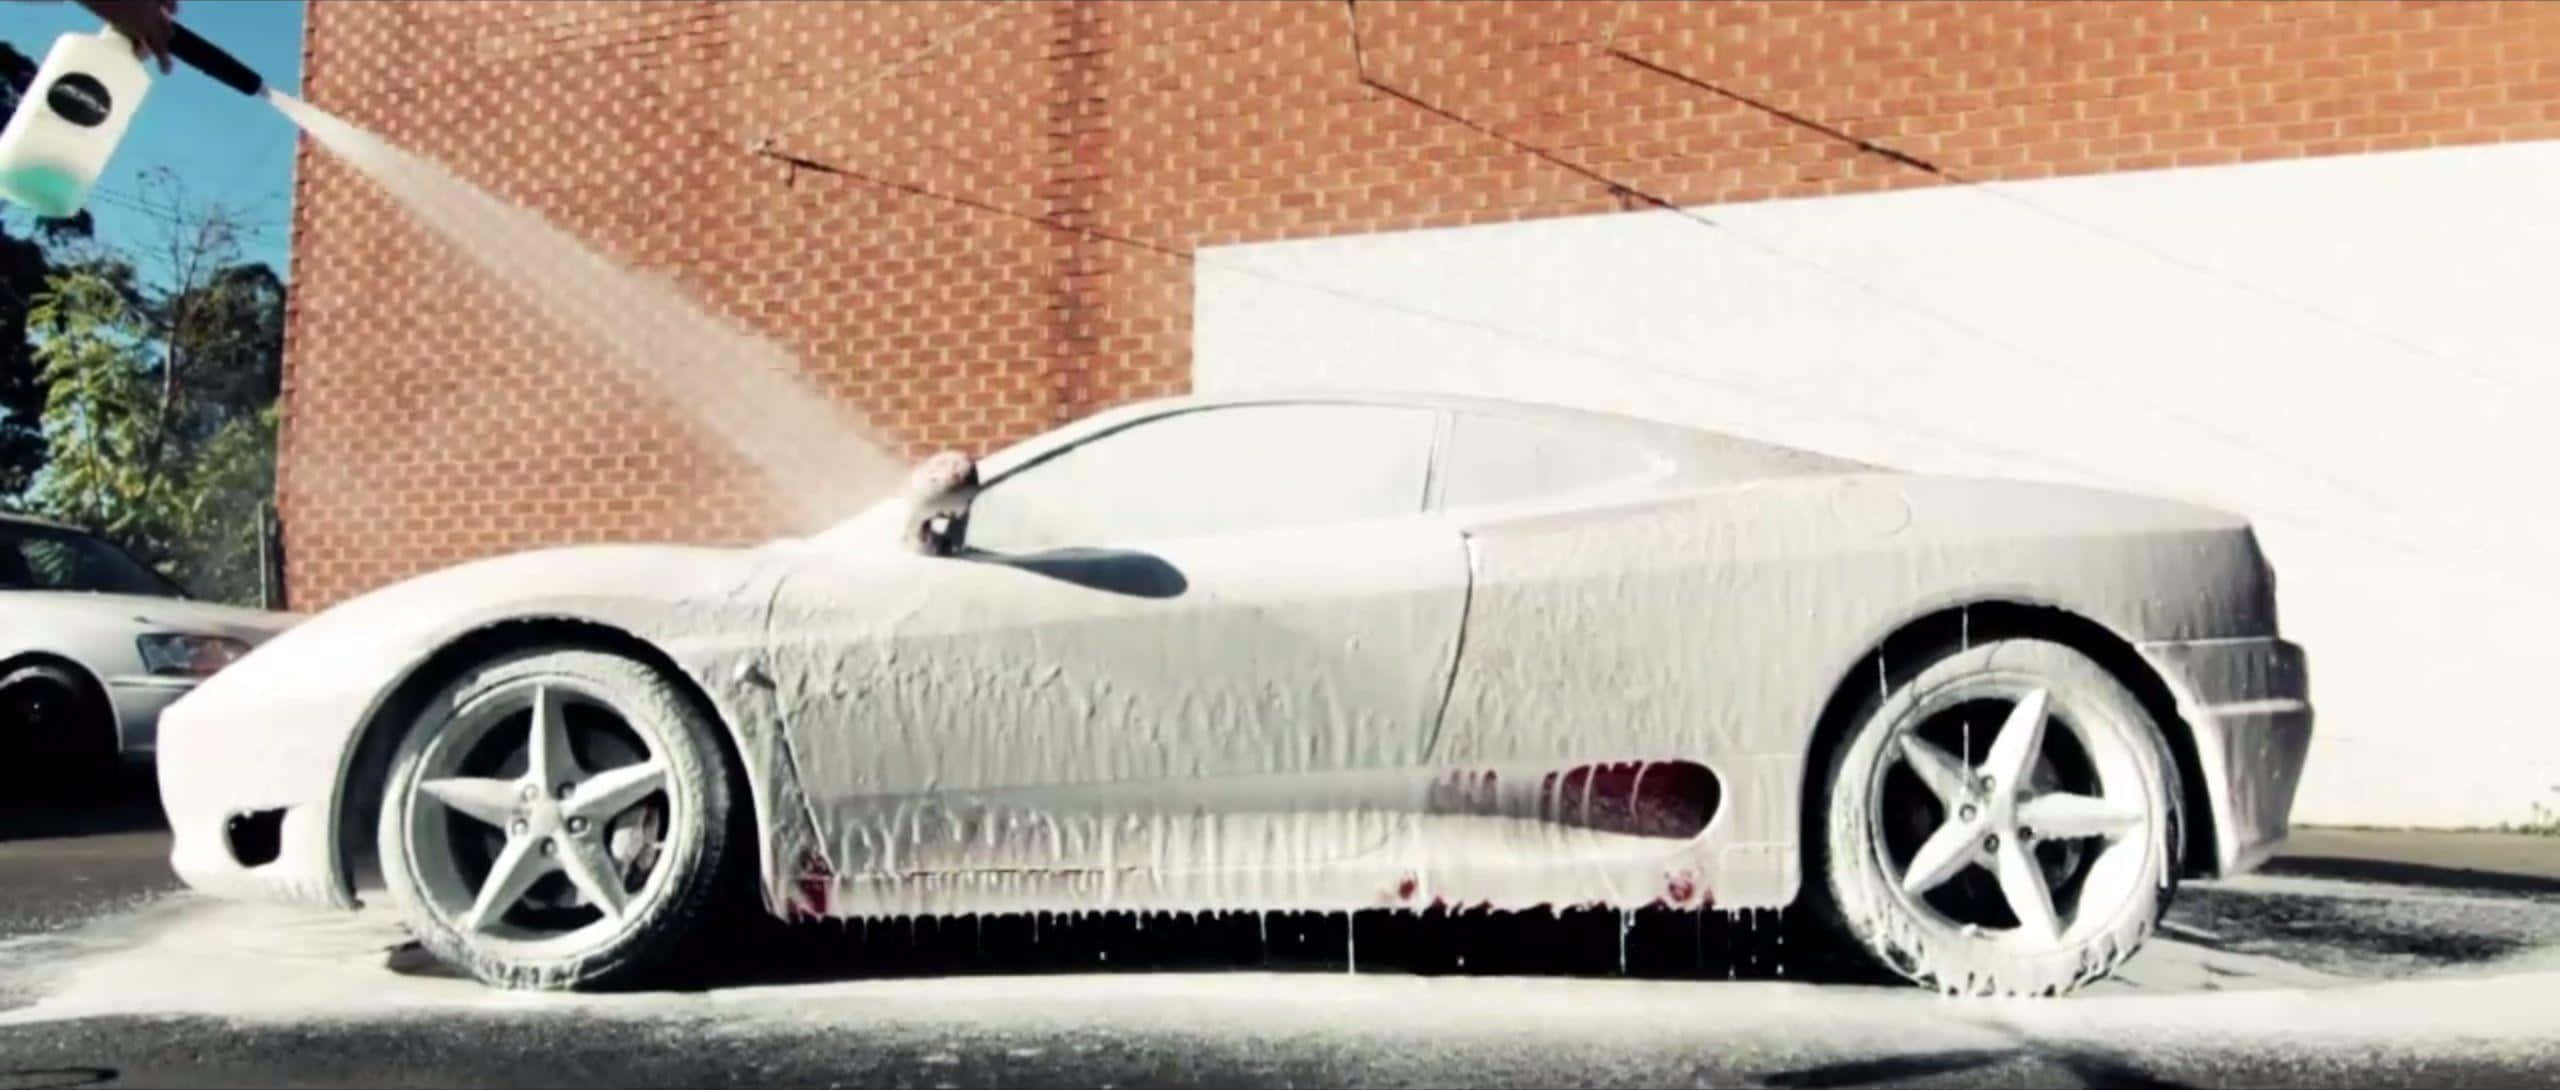 Get your car looking its best with a good car wash.